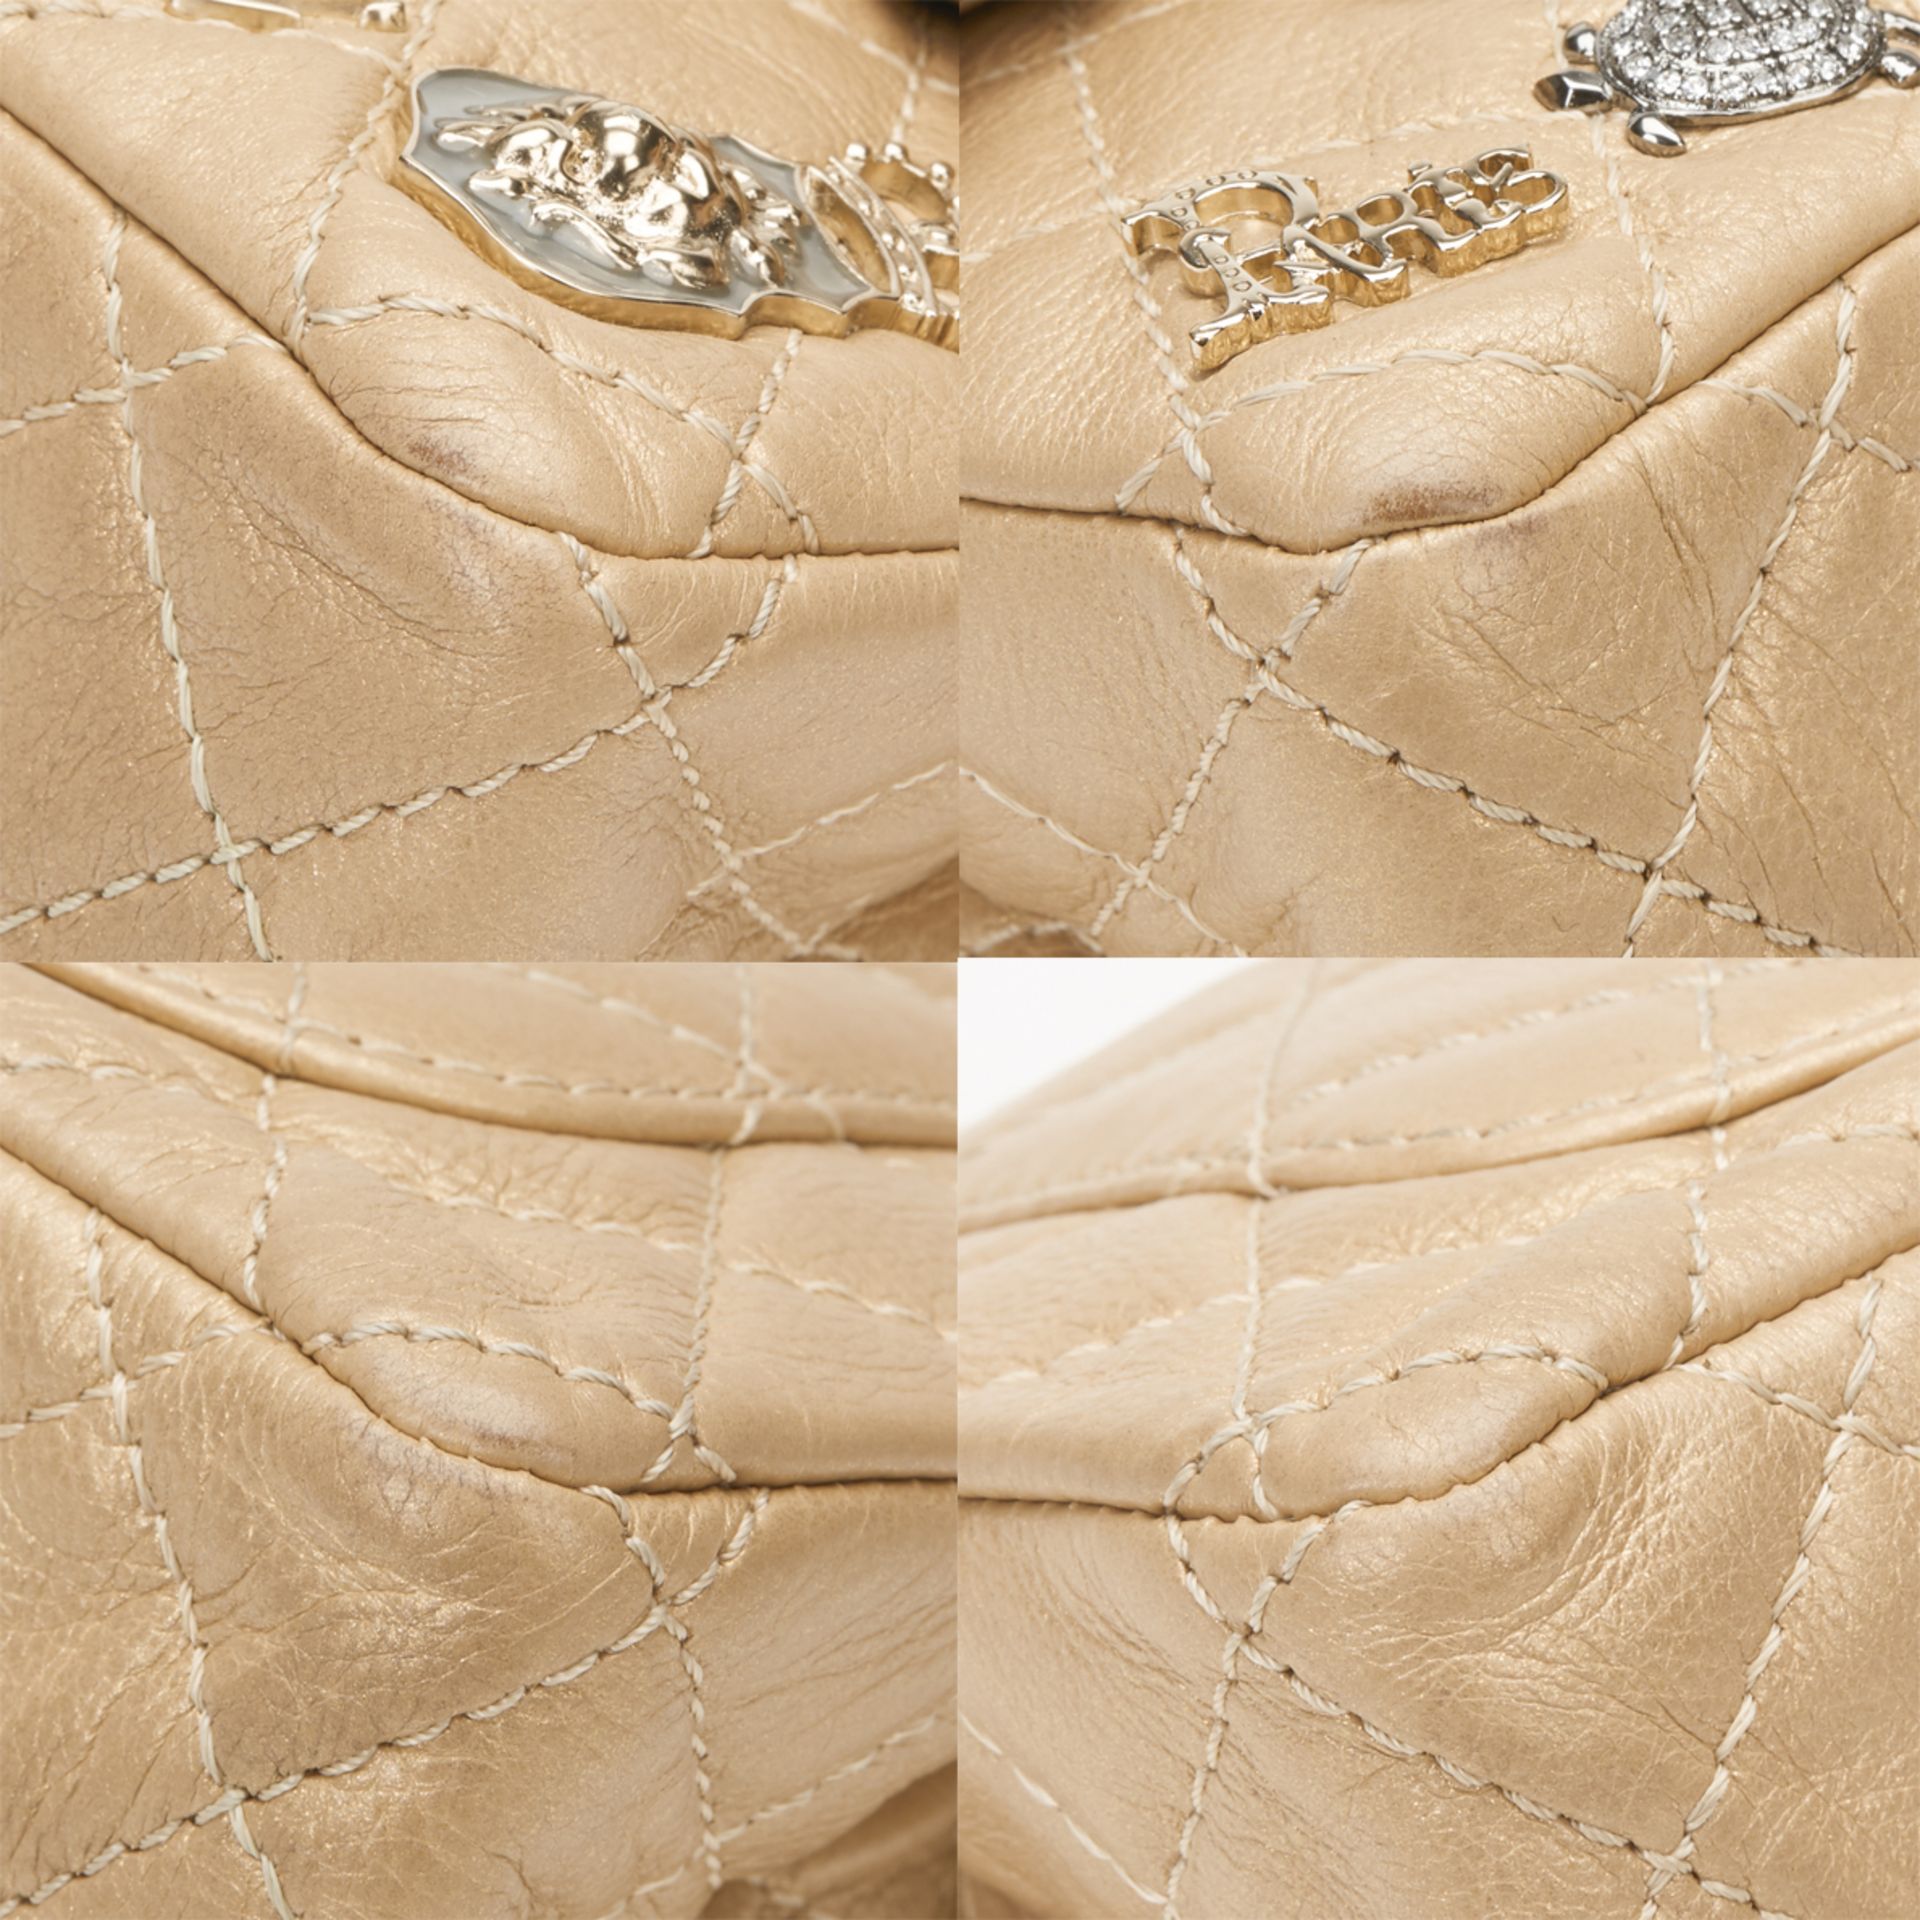 Gold Aged Metallic Calfskin Leather Lucky Charms 2.55 Reissue 224 Double Flap Bag - Image 11 of 13